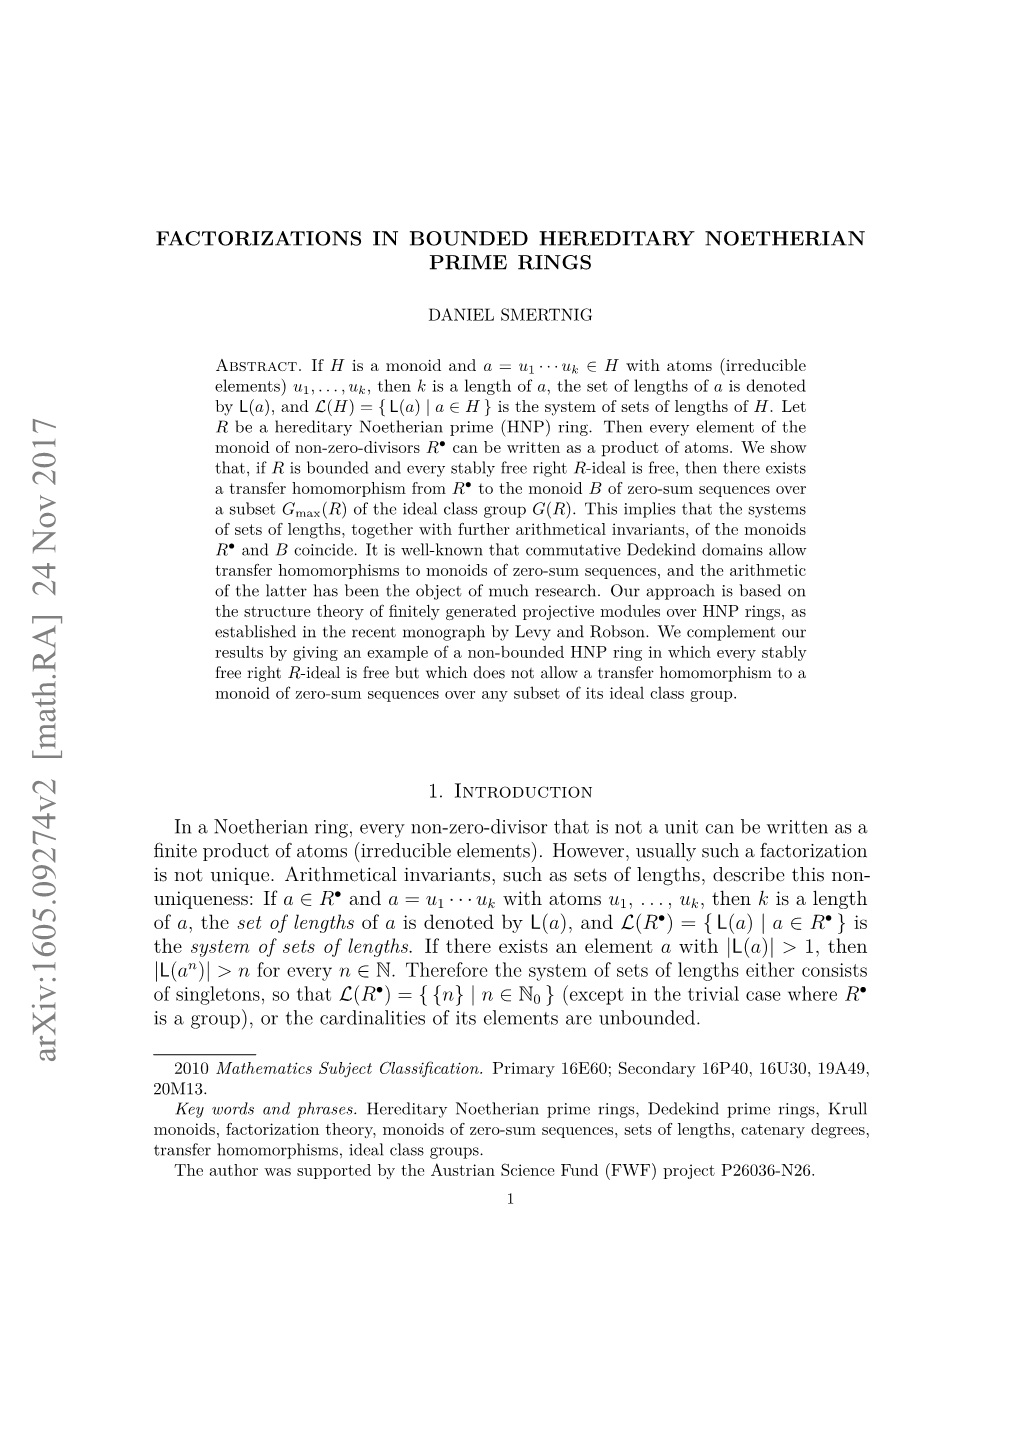 Factorizations in Bounded Hereditary Noetherian Prime Rings